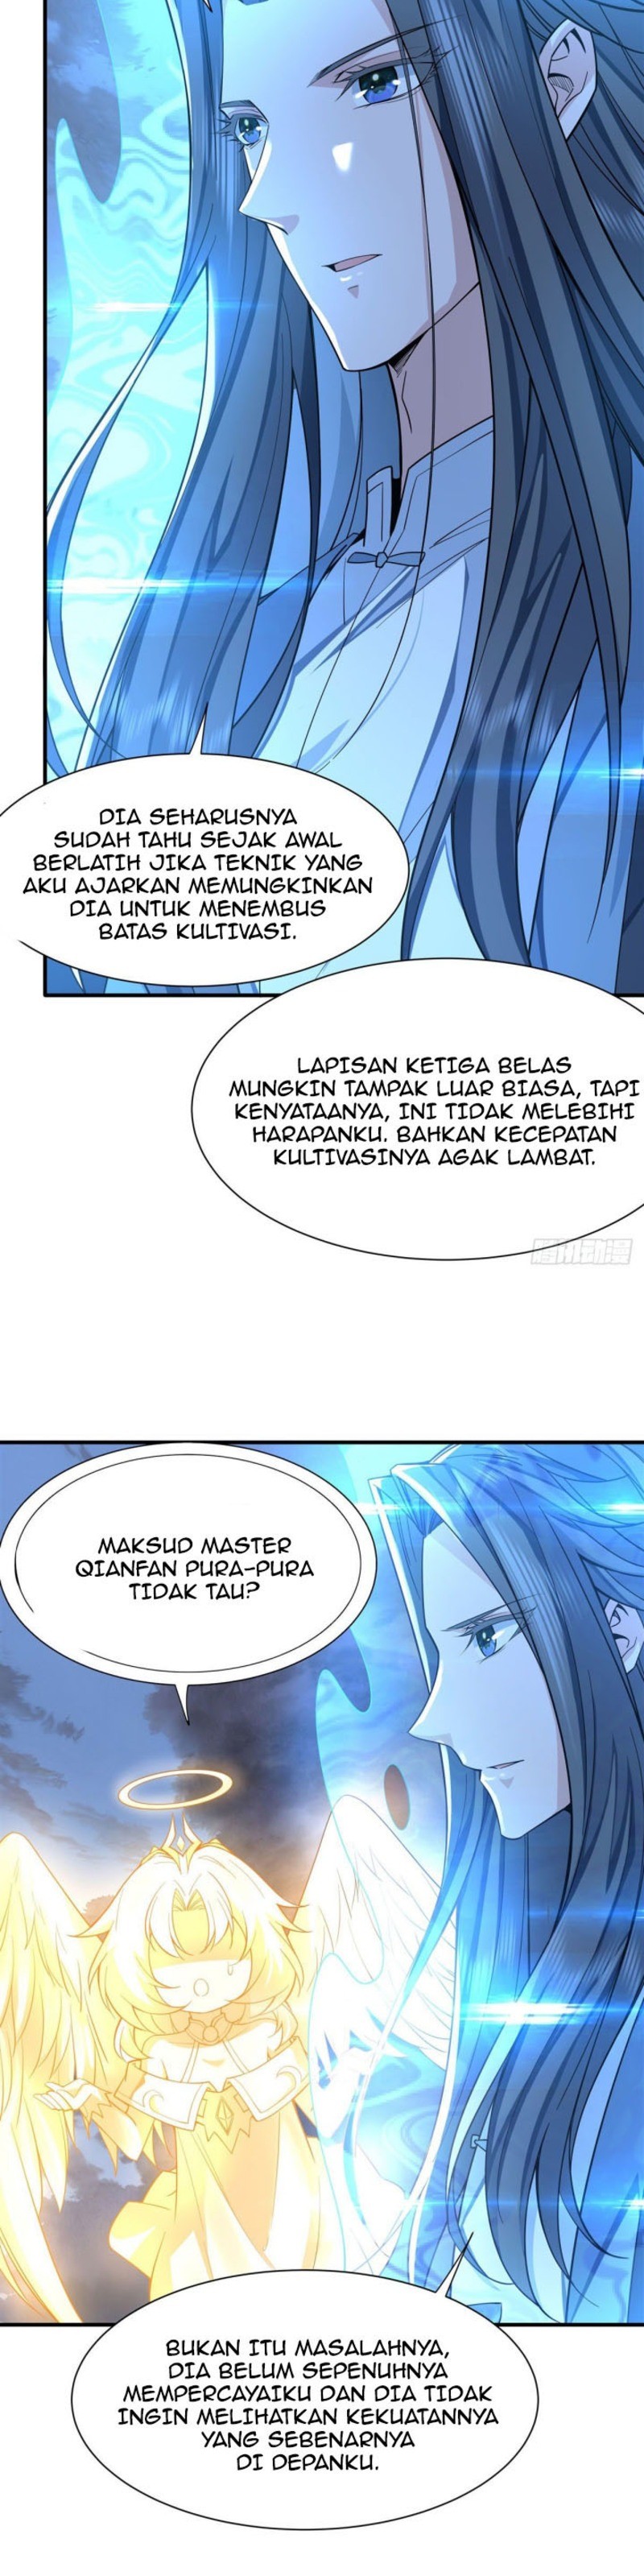 Dilarang COPAS - situs resmi www.mangacanblog.com - Komik my female apprentices are all big shots from the future 011 - chapter 11 12 Indonesia my female apprentices are all big shots from the future 011 - chapter 11 Terbaru 9|Baca Manga Komik Indonesia|Mangacan